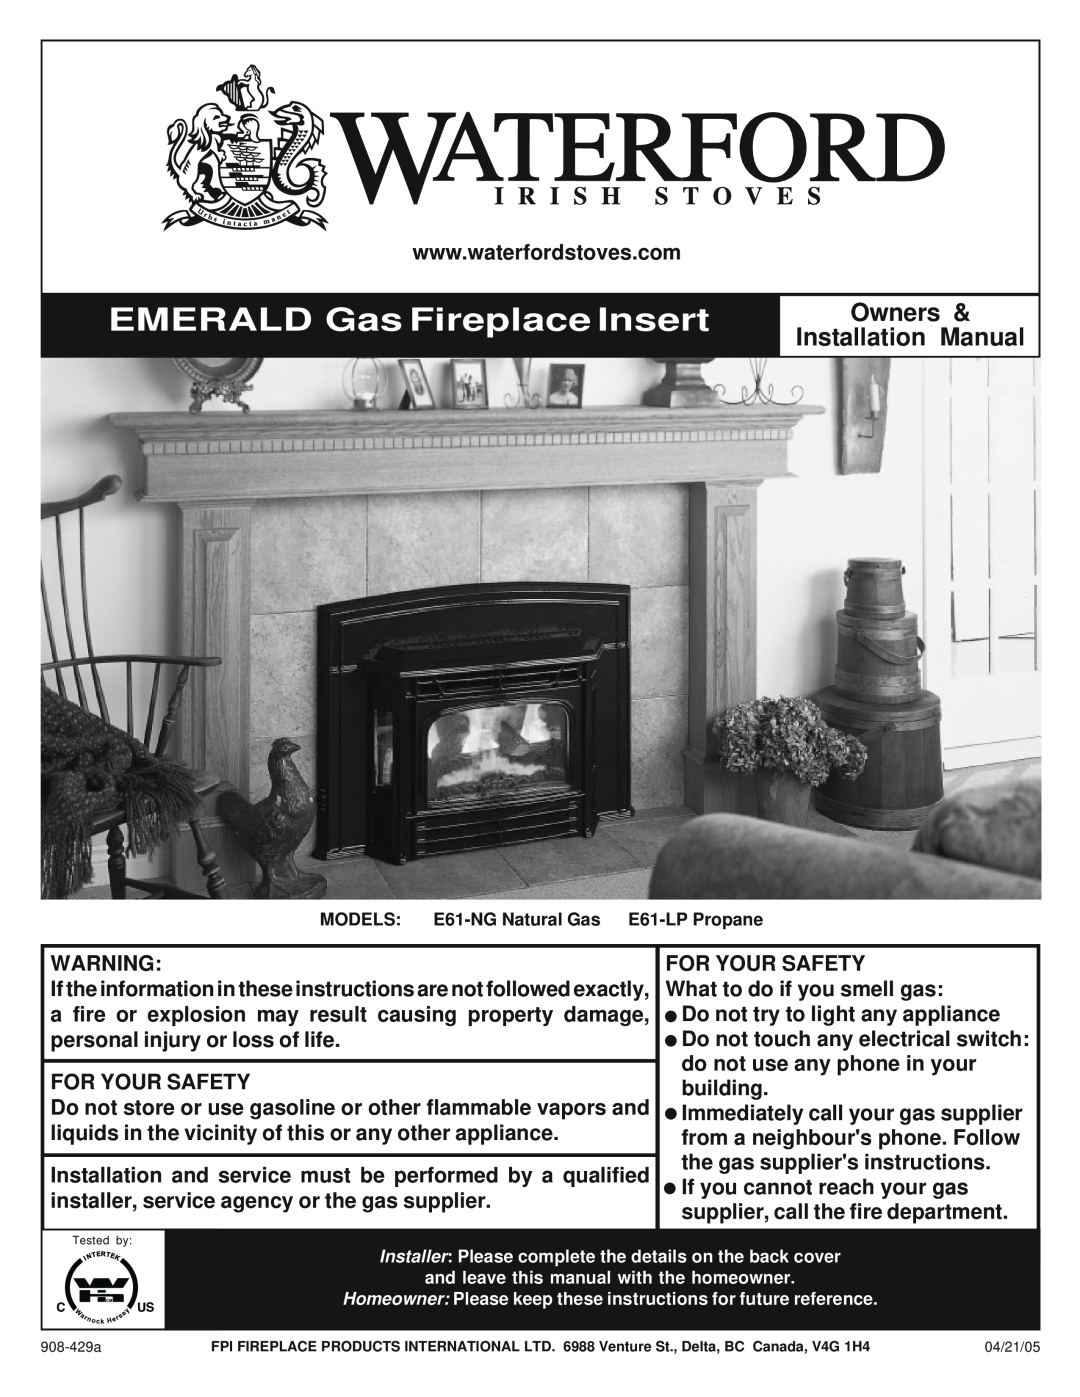 Waterford Appliances E61-LP, E61-NG installation manual Owners, Installation Manual, EMERALD Gas Fireplace Insert 